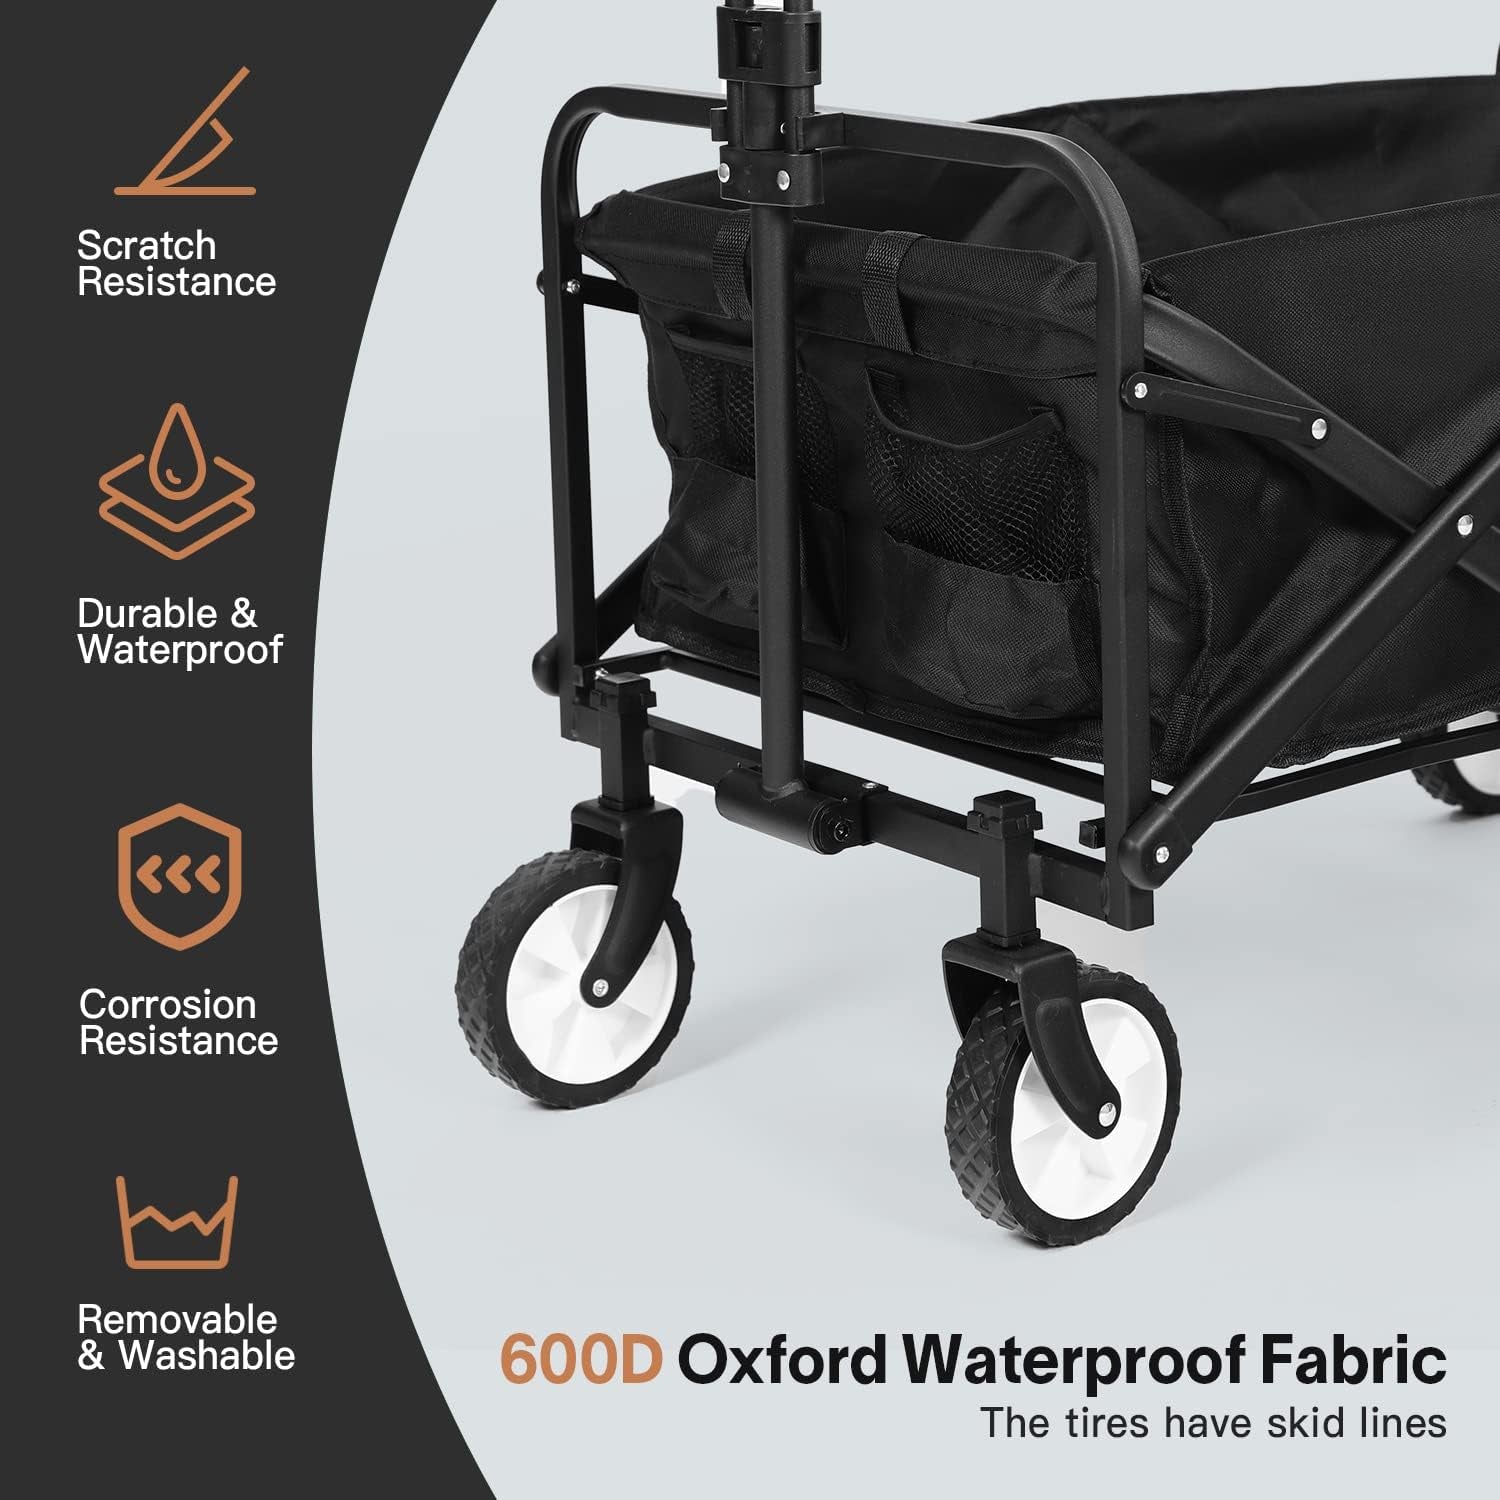 Collapsible Folding Wagon Cart, Heavy Duty Utility Beach Wagon Cart with Wheels Foldable, 220LBS Large Capacity Foldable Grocery Wagon for Camping Garden Shopping Sports, Black/1 Year Warranty - Design By Technique